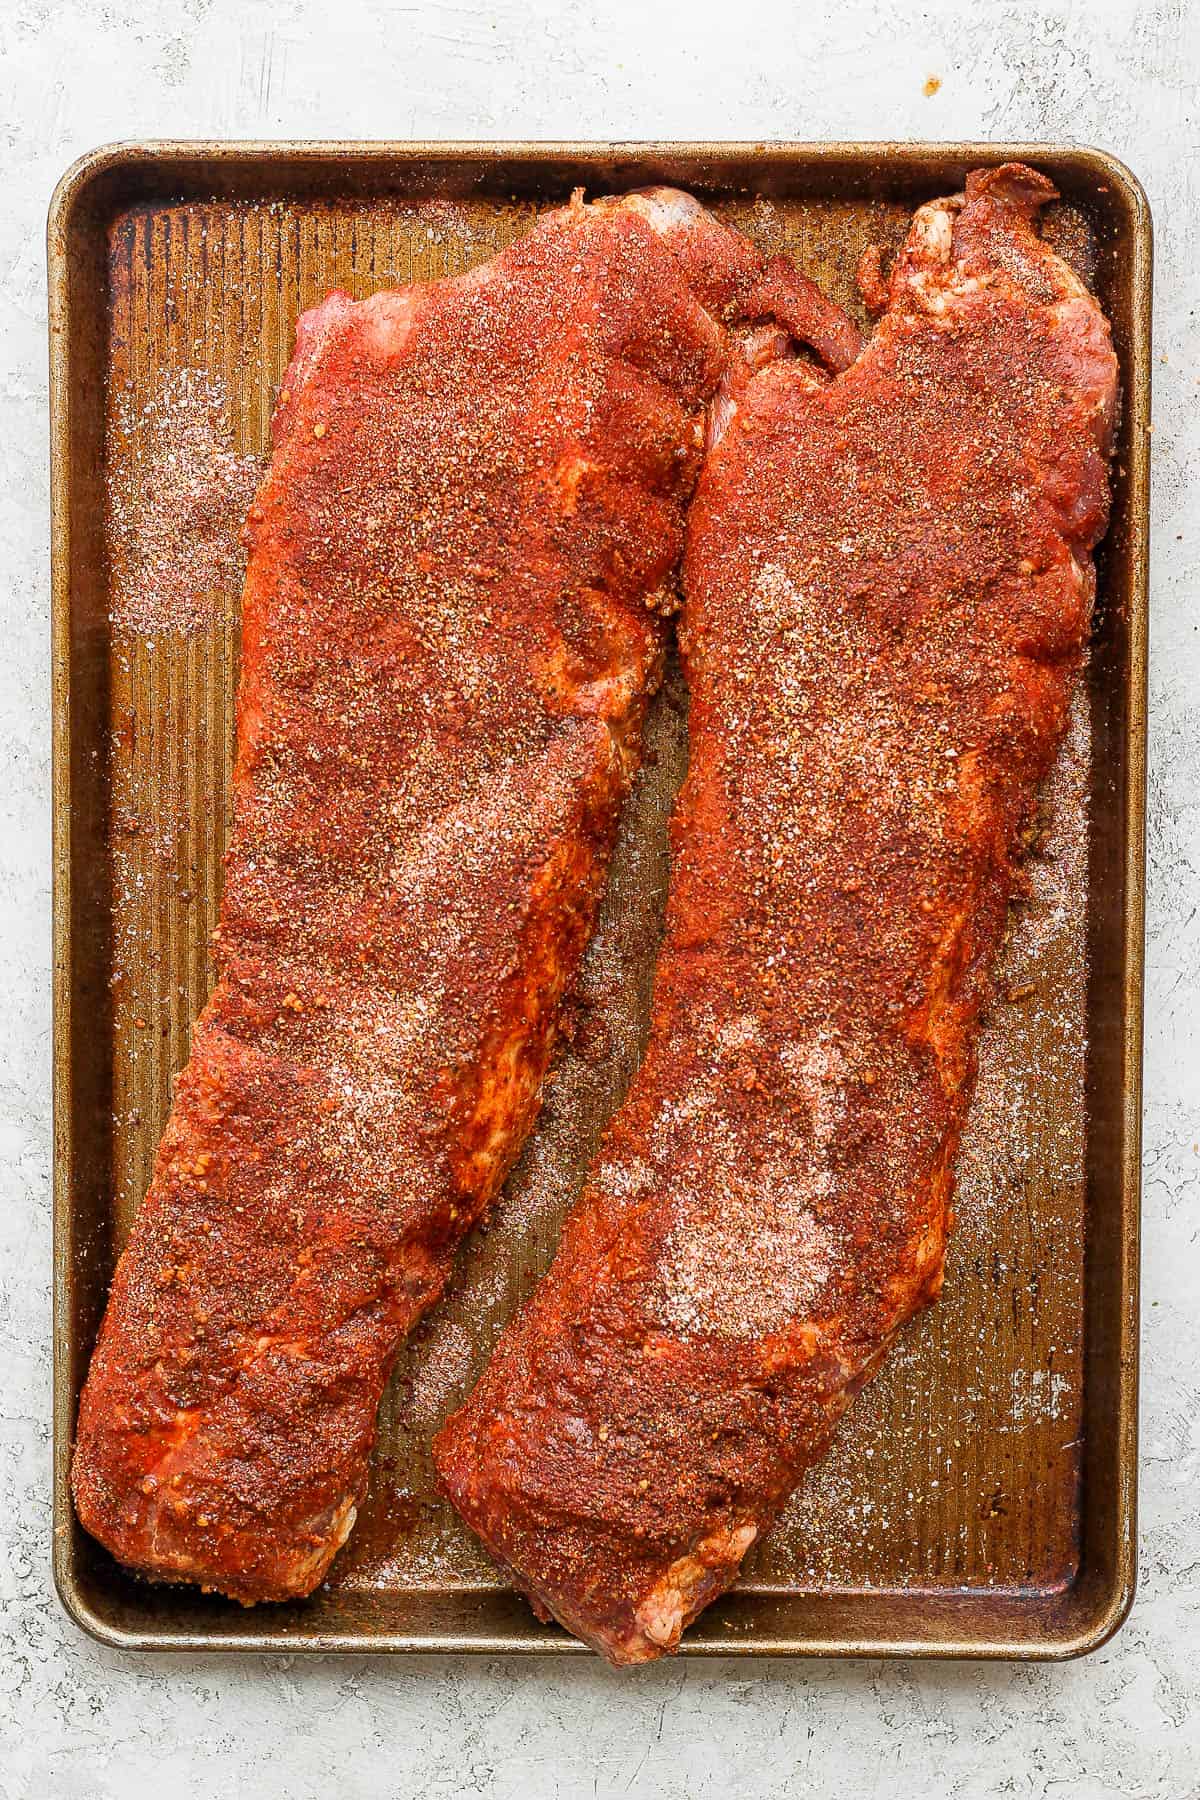 Marinated ribs on a baking sheet with the dry rub spices rubbed all over them.